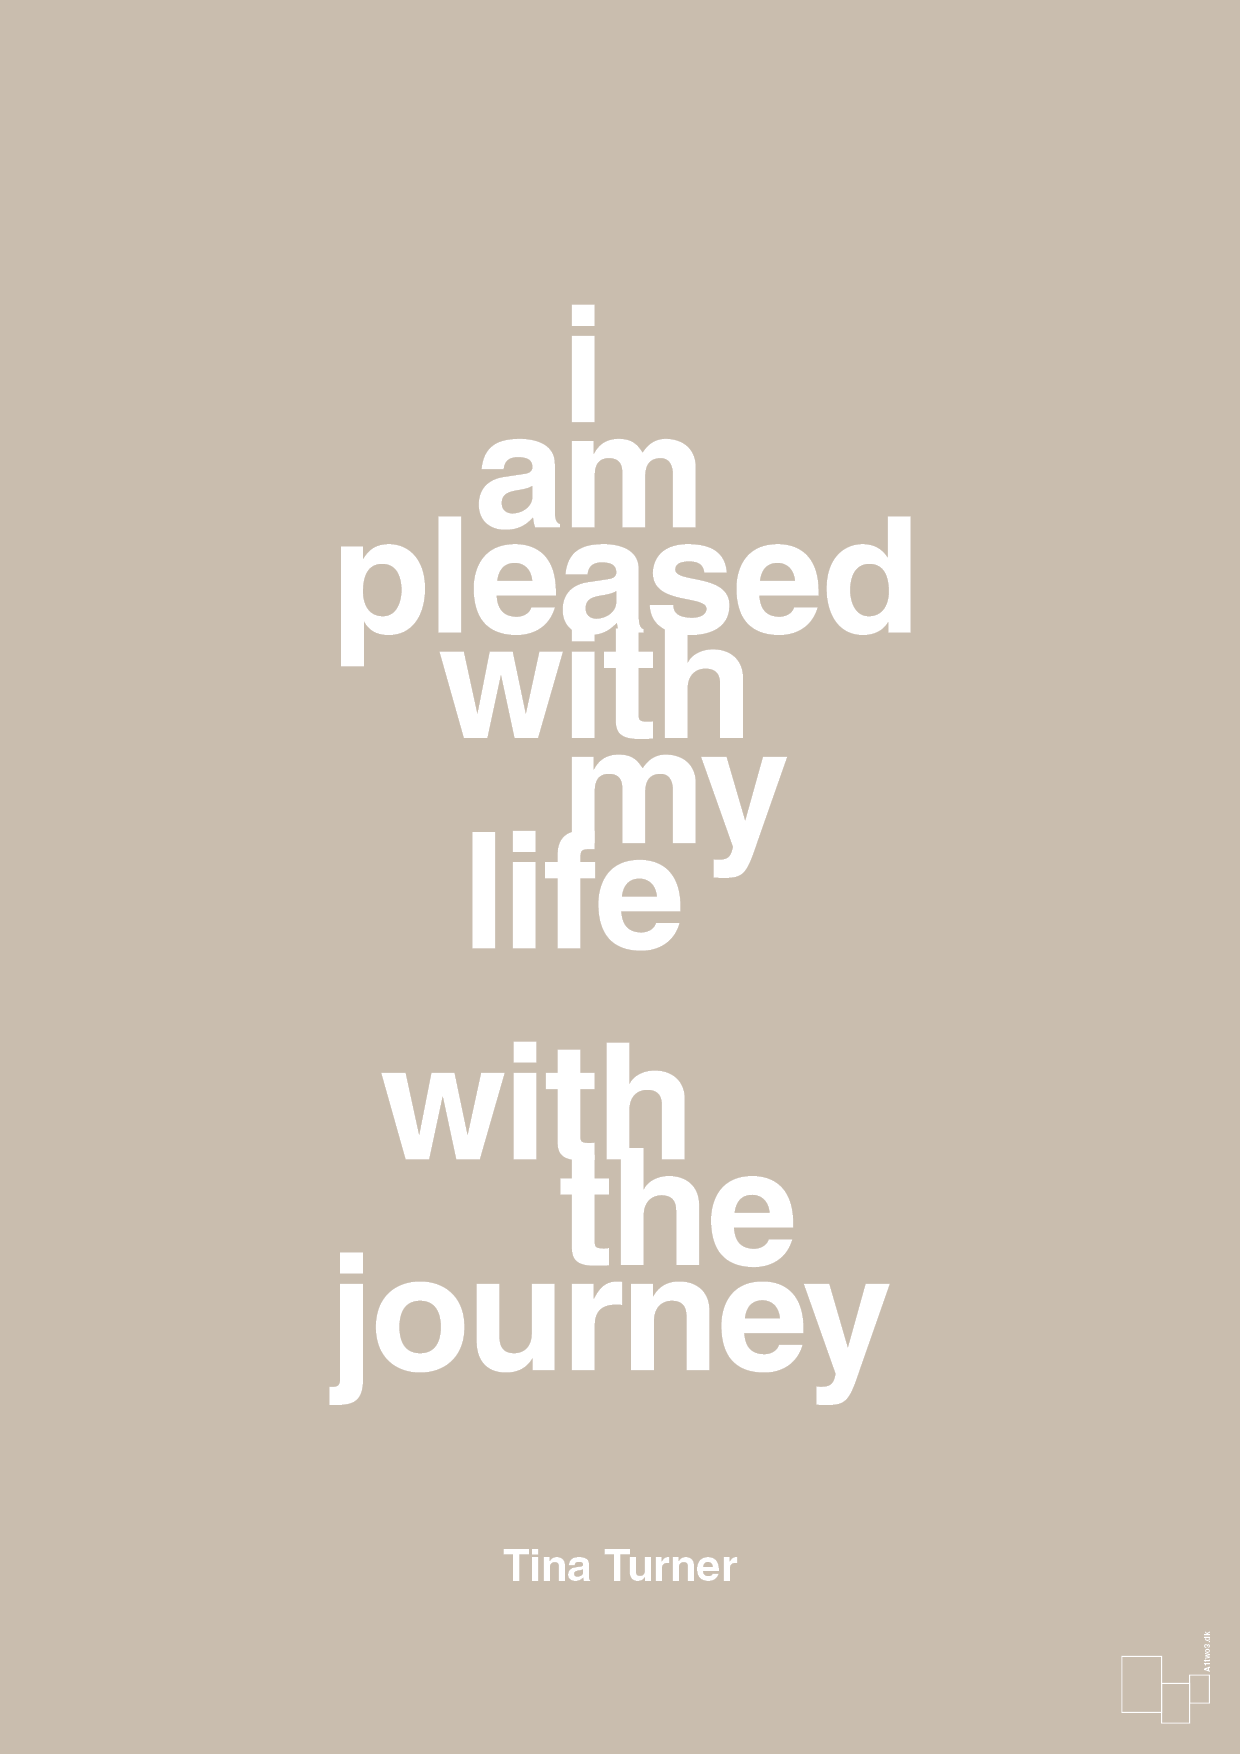 i am pleased with my life with the journey - Plakat med Citater i Creamy Mushroom